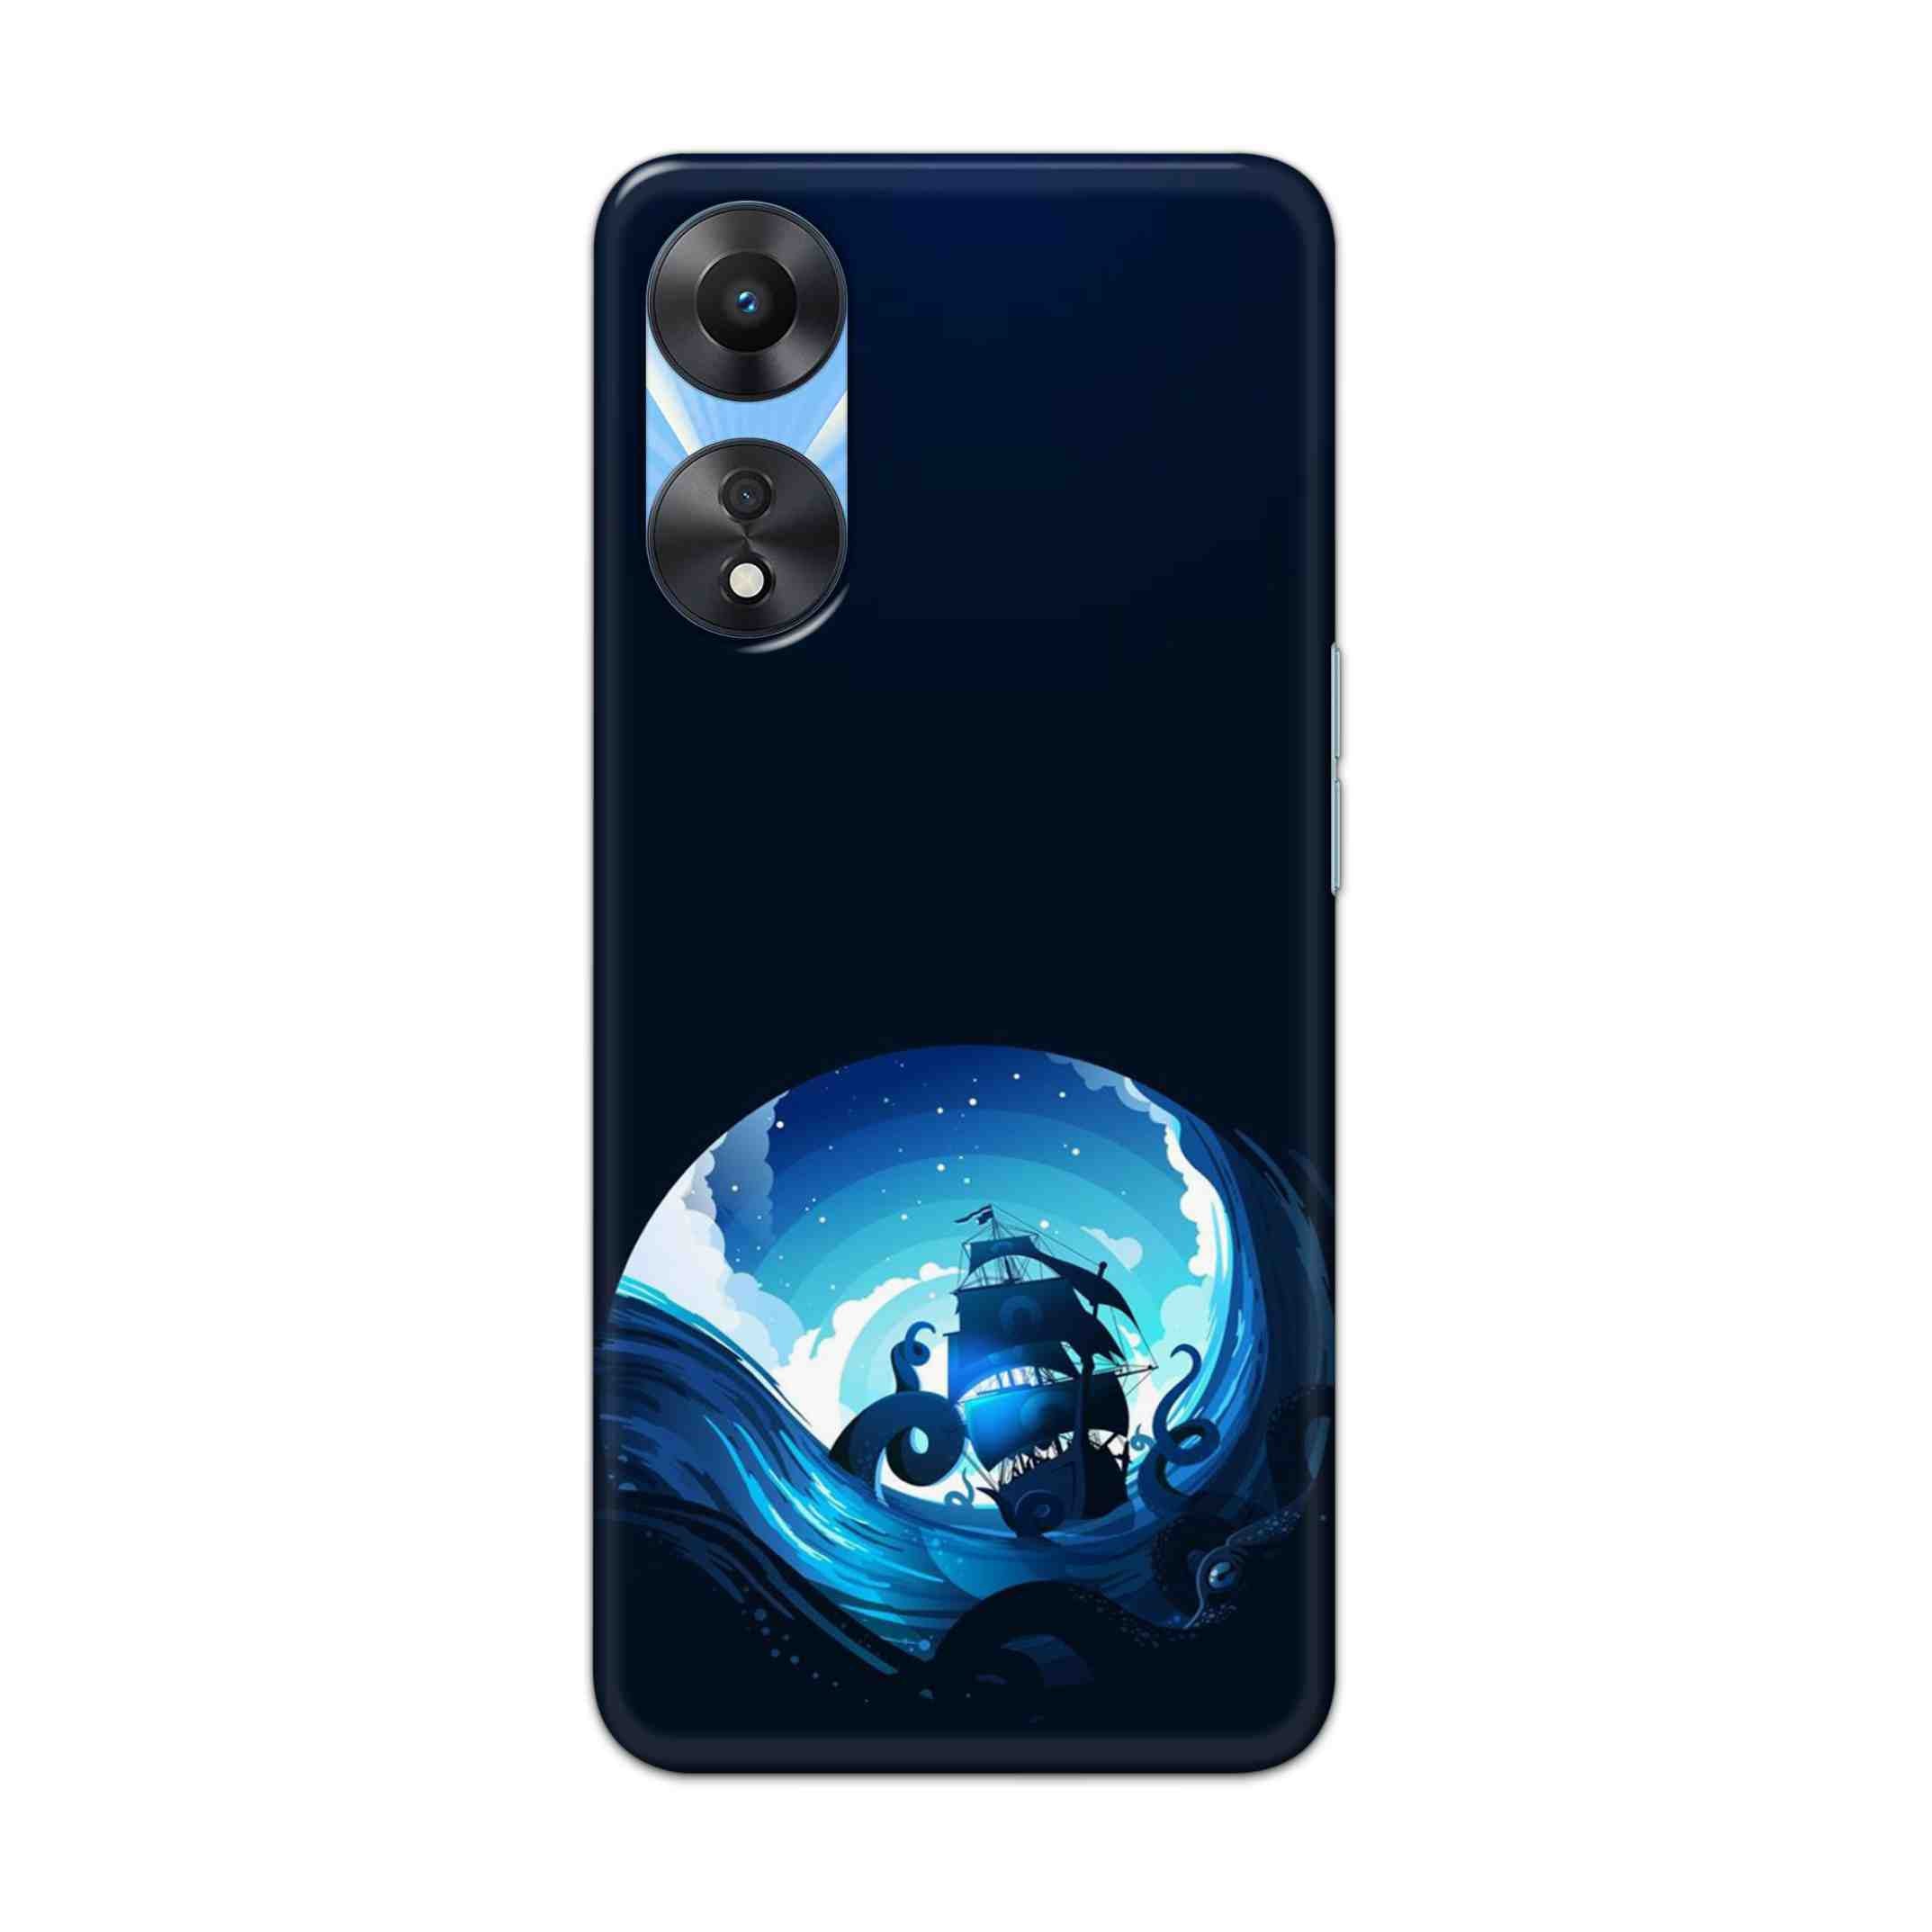 Buy Blue Sea Ship Hard Back Mobile Phone Case Cover For OPPO A78 Online